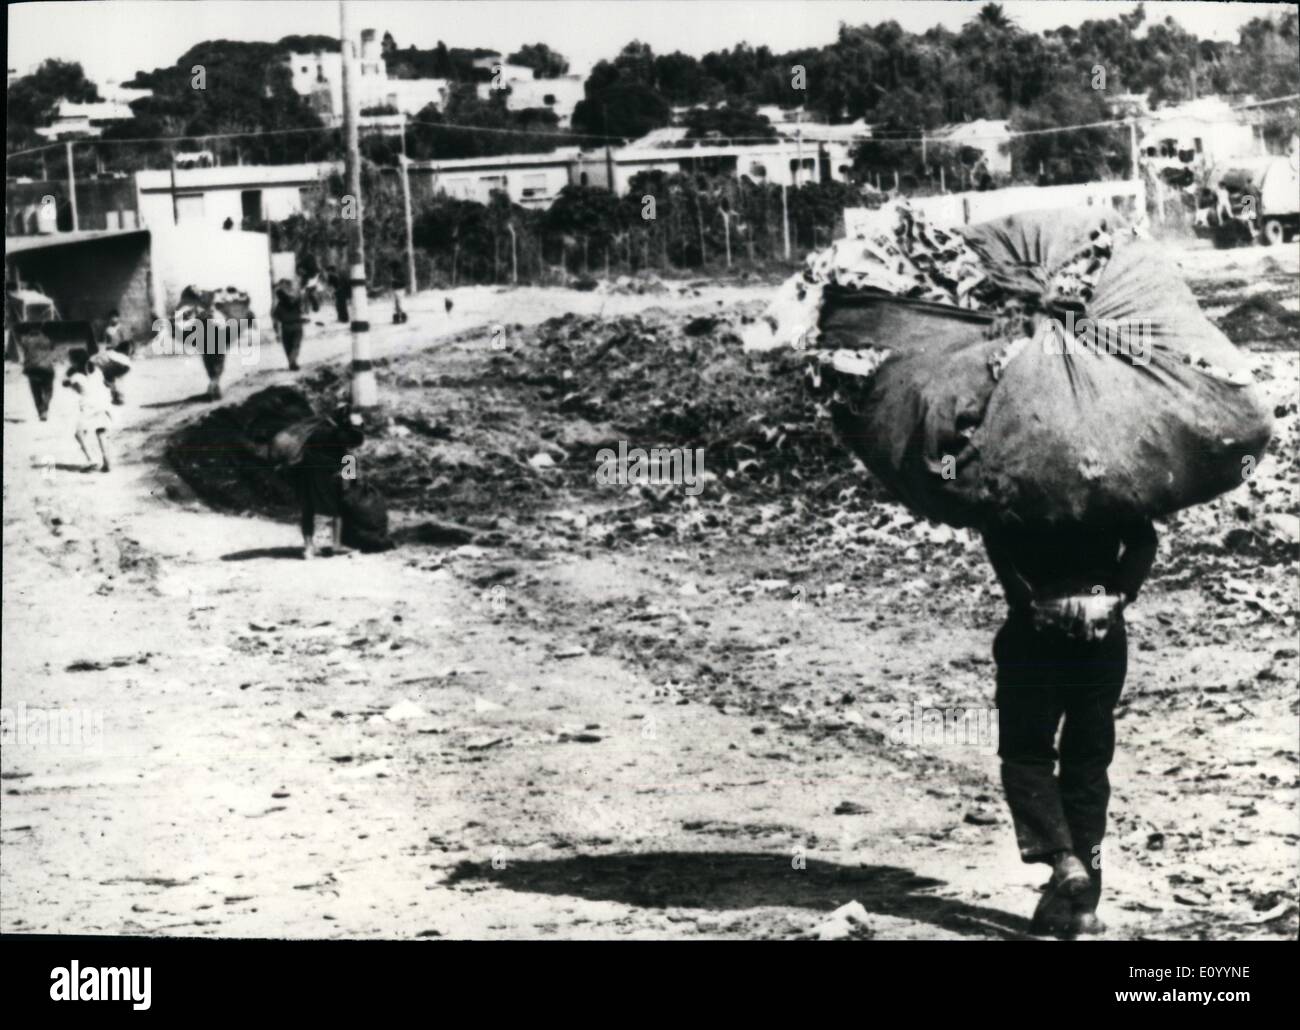 Dec. 12, 1971 - Uruguay-Montevideo's ''Cantegril'' slums: ''This ain't said just to complain but, my friend, if you push me I'll tell you I don't enjoy picking garbage. Stock Photo